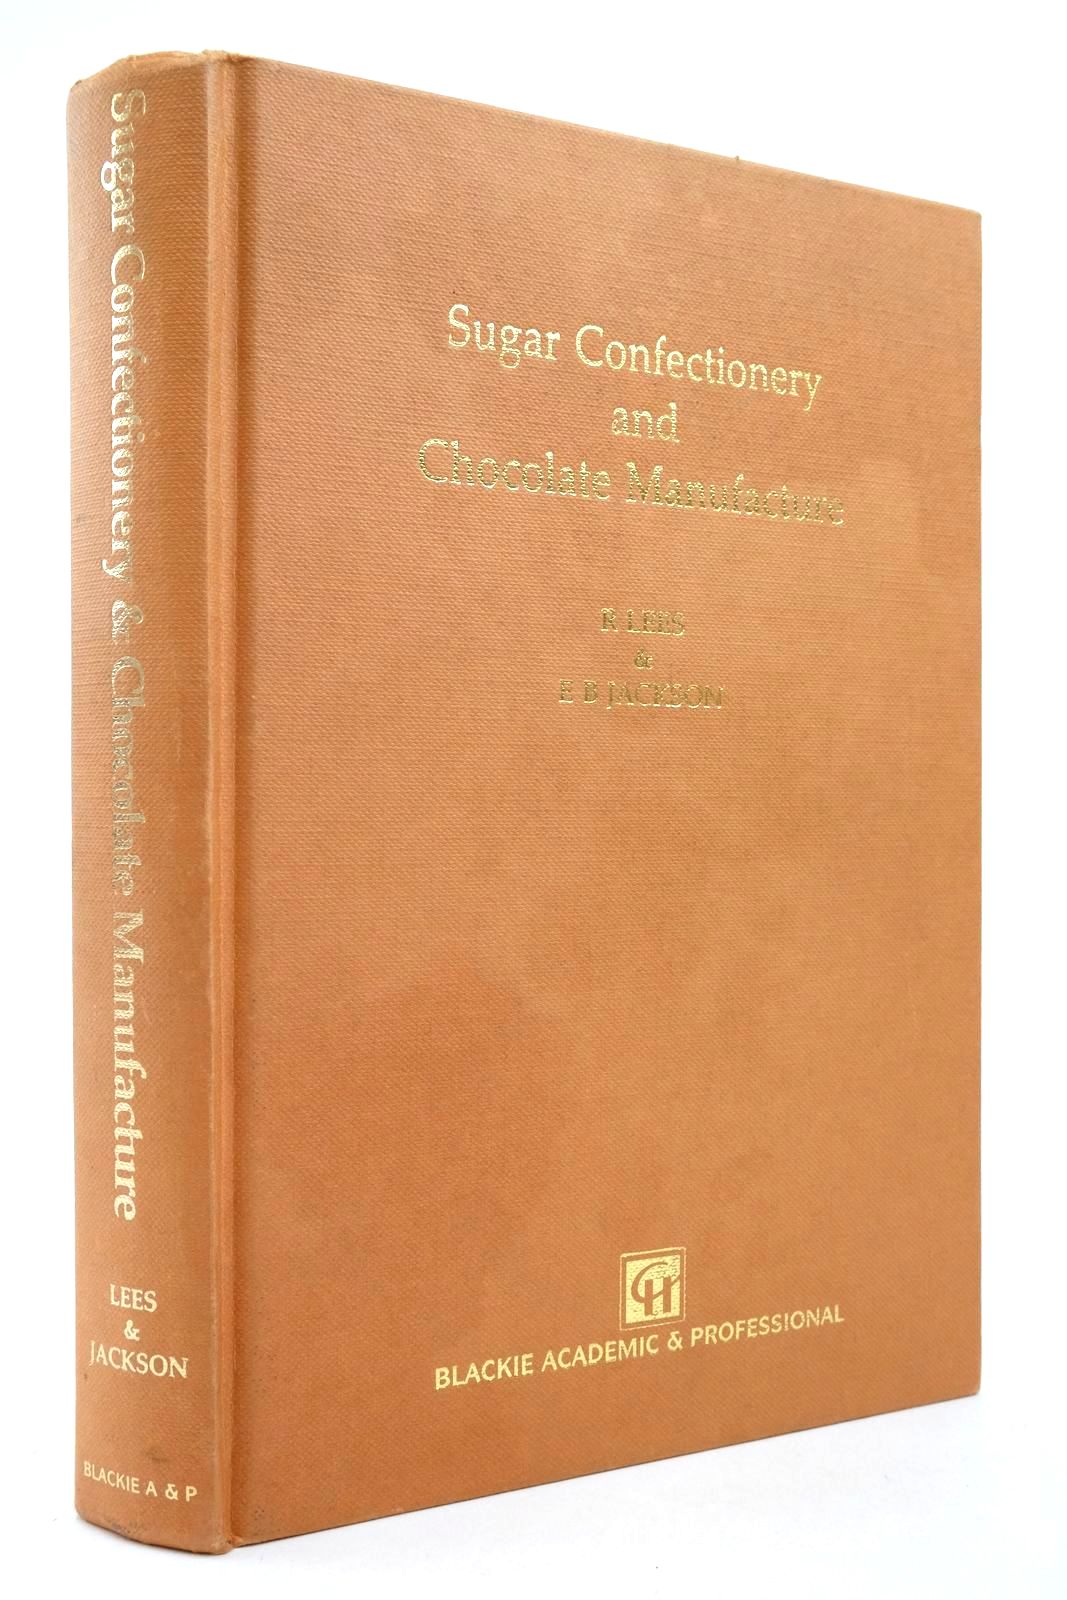 Photo of SUGAR CONFECTIONARY AND CHOCOLATE MANUFACTURE written by Lees, R.
Jackson, E.B. published by Blackie Academic & Professional (STOCK CODE: 2136826)  for sale by Stella & Rose's Books